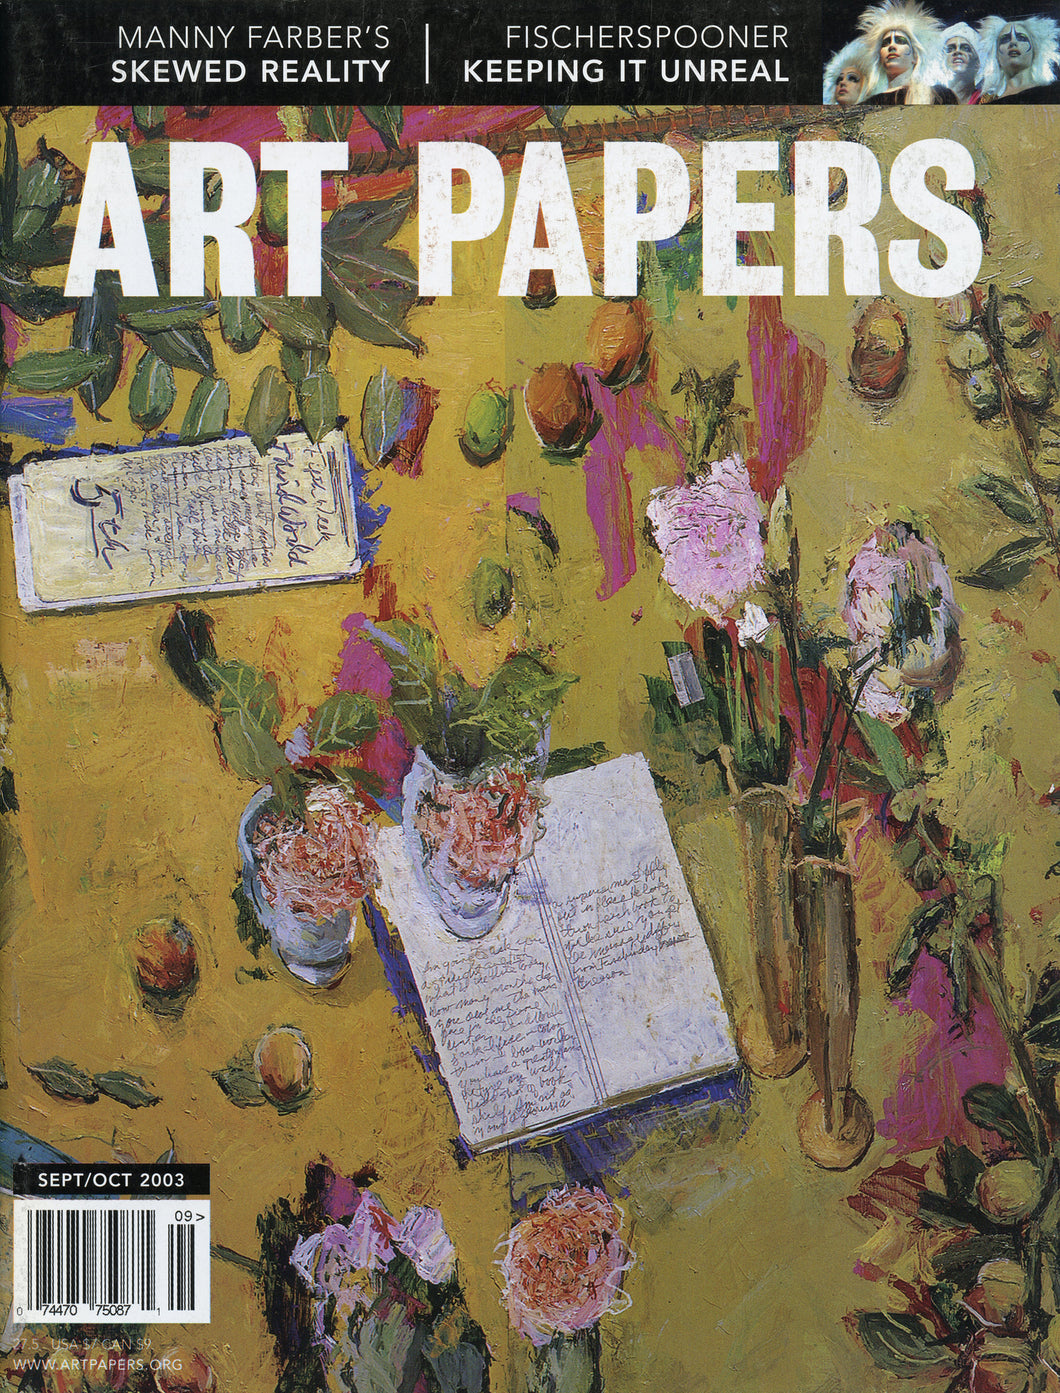 ART PAPERS 27.05 - Sept/Oct 2003 - SOLD OUT